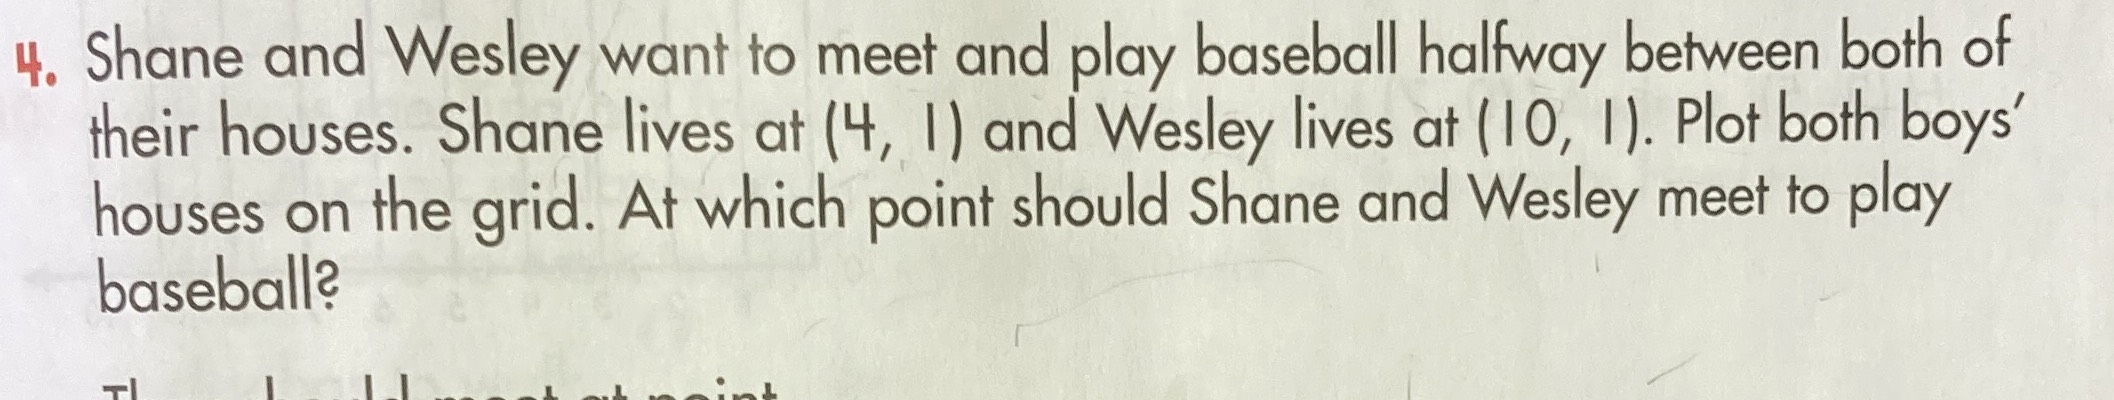 4. Shane and Wesley want to meet and play baseball...